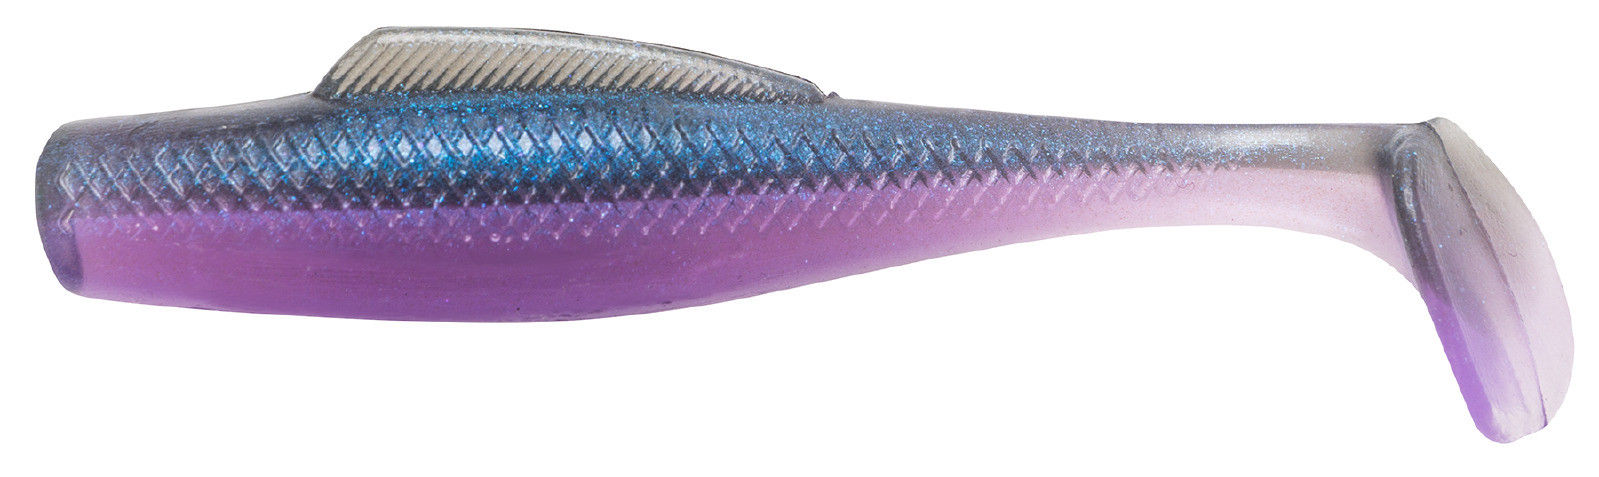 Swimerz Soft Shad 100mm Paddle Tail lure, Red Bug, 6 pack – Blue